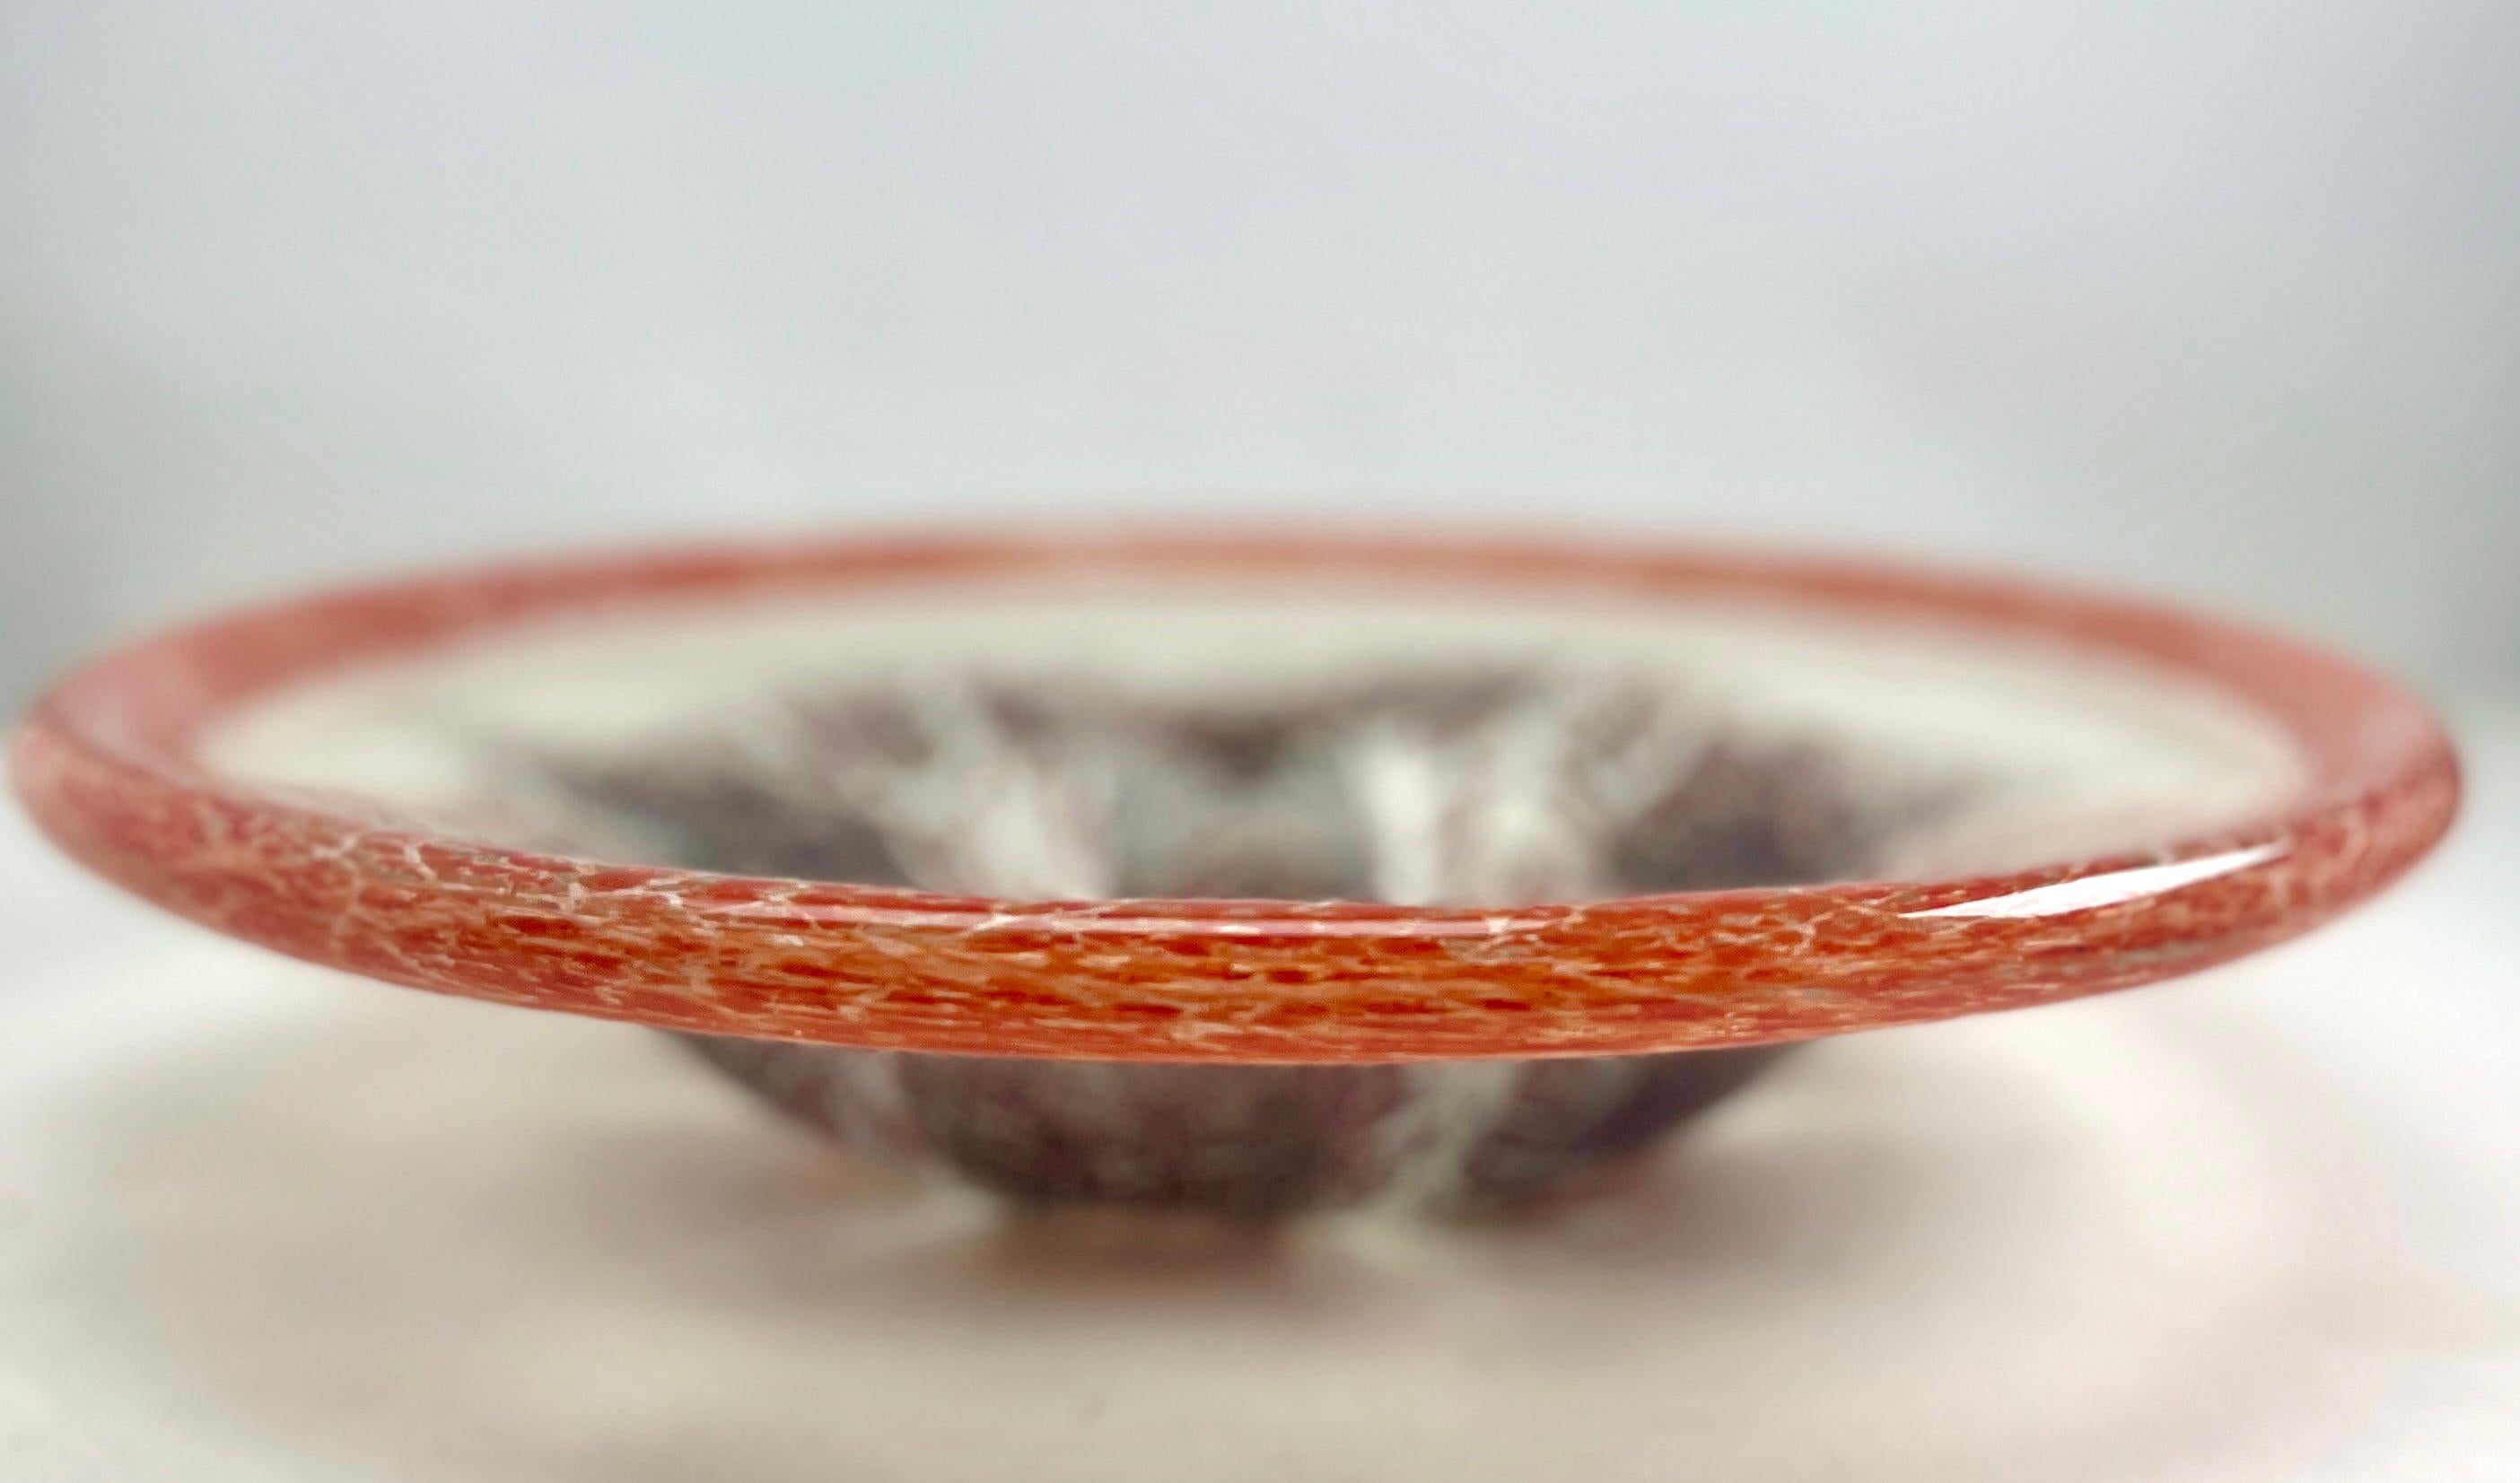 'Ikora' Art Glass Bowl, Produced, by WMF in Germany, 1930s by Karl Wiedmann In Good Condition For Sale In Verviers, BE